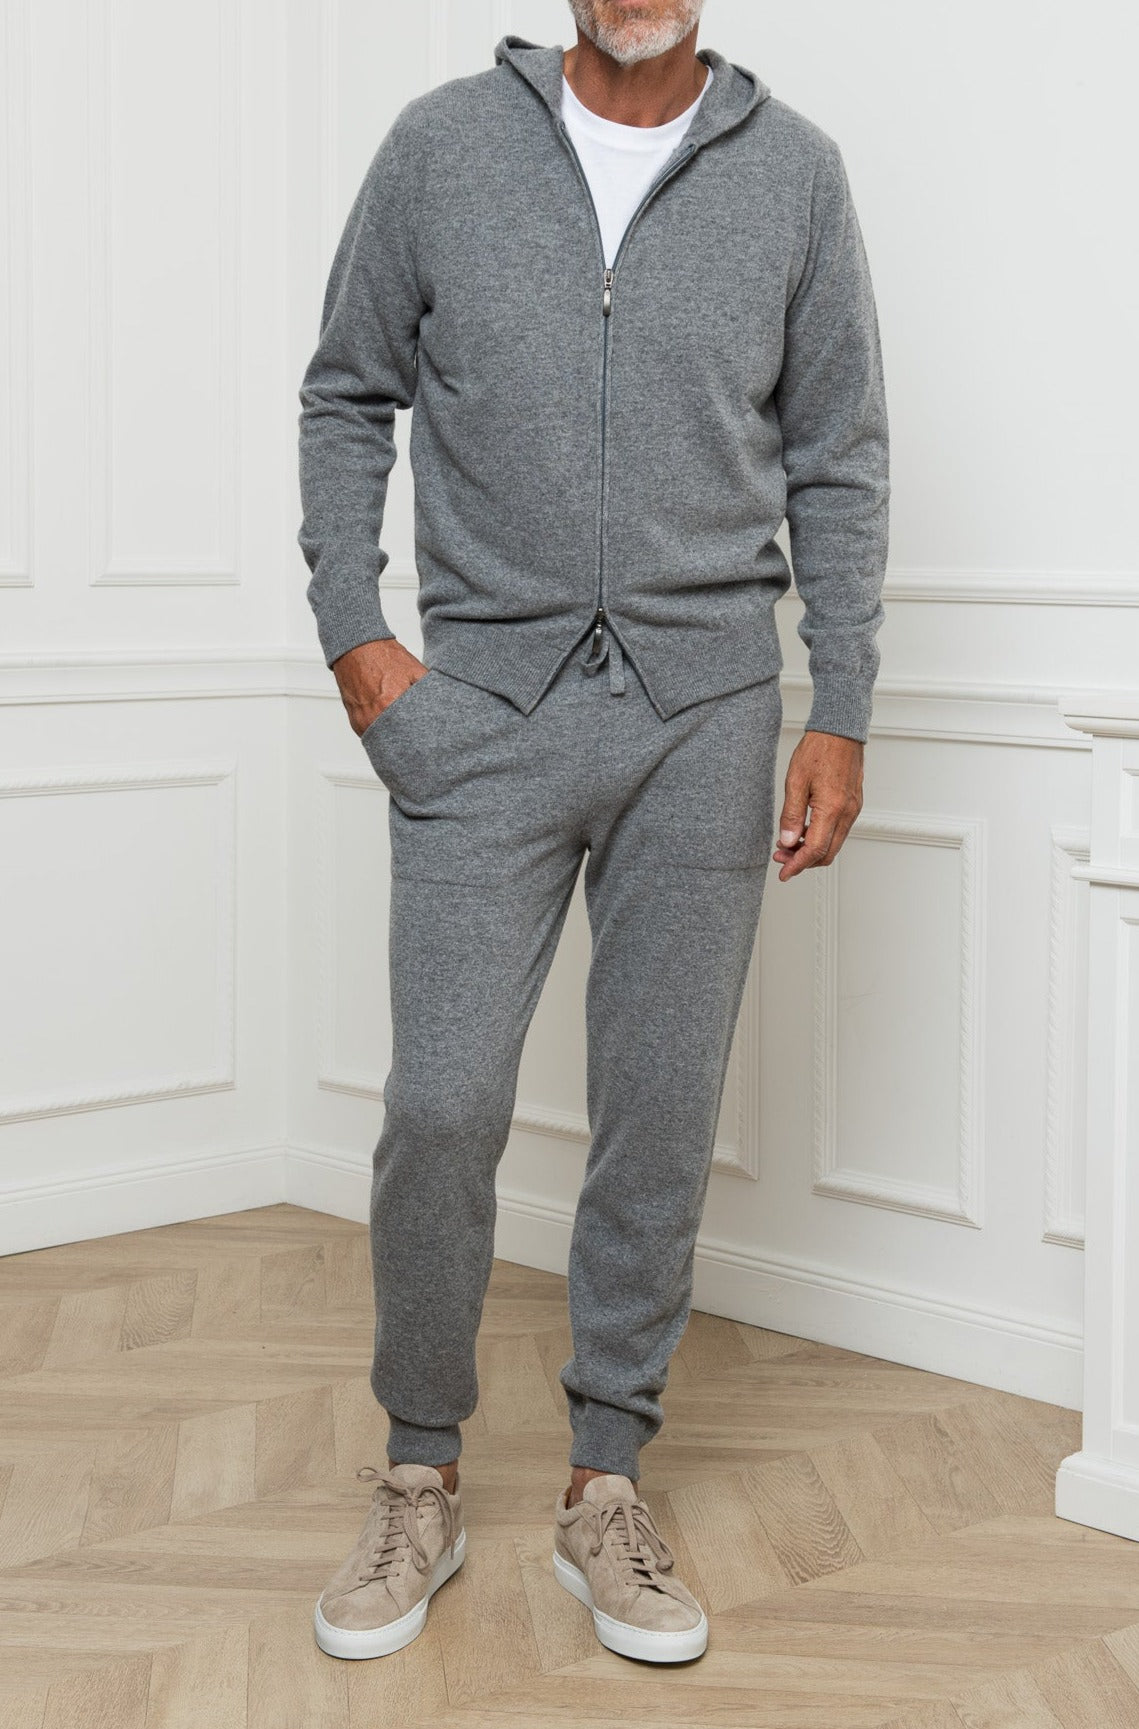 Grey Leisure Joggers - Made in Italy